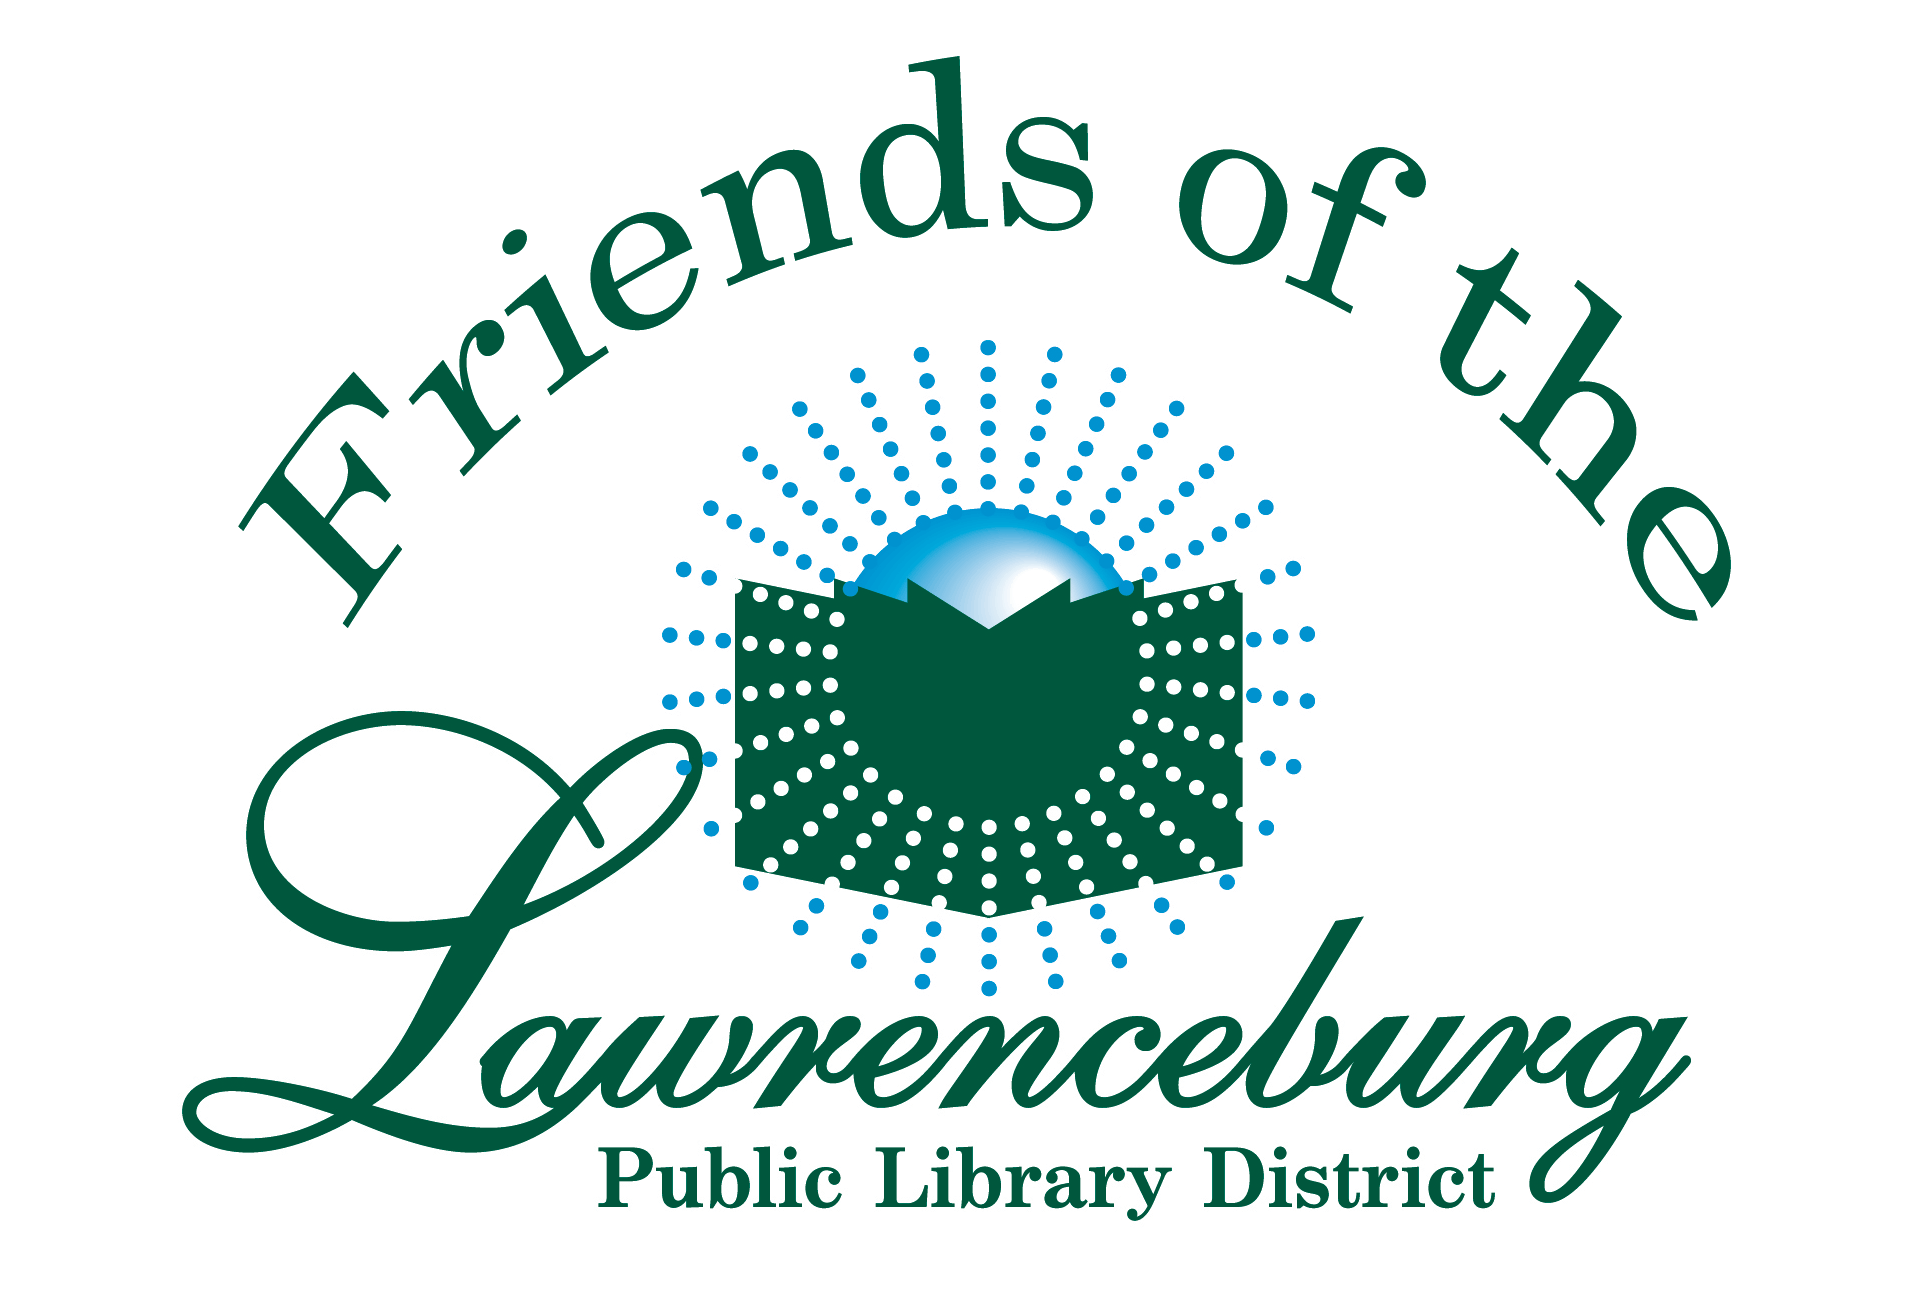 Friends of the Lawrenceburg Public Library District